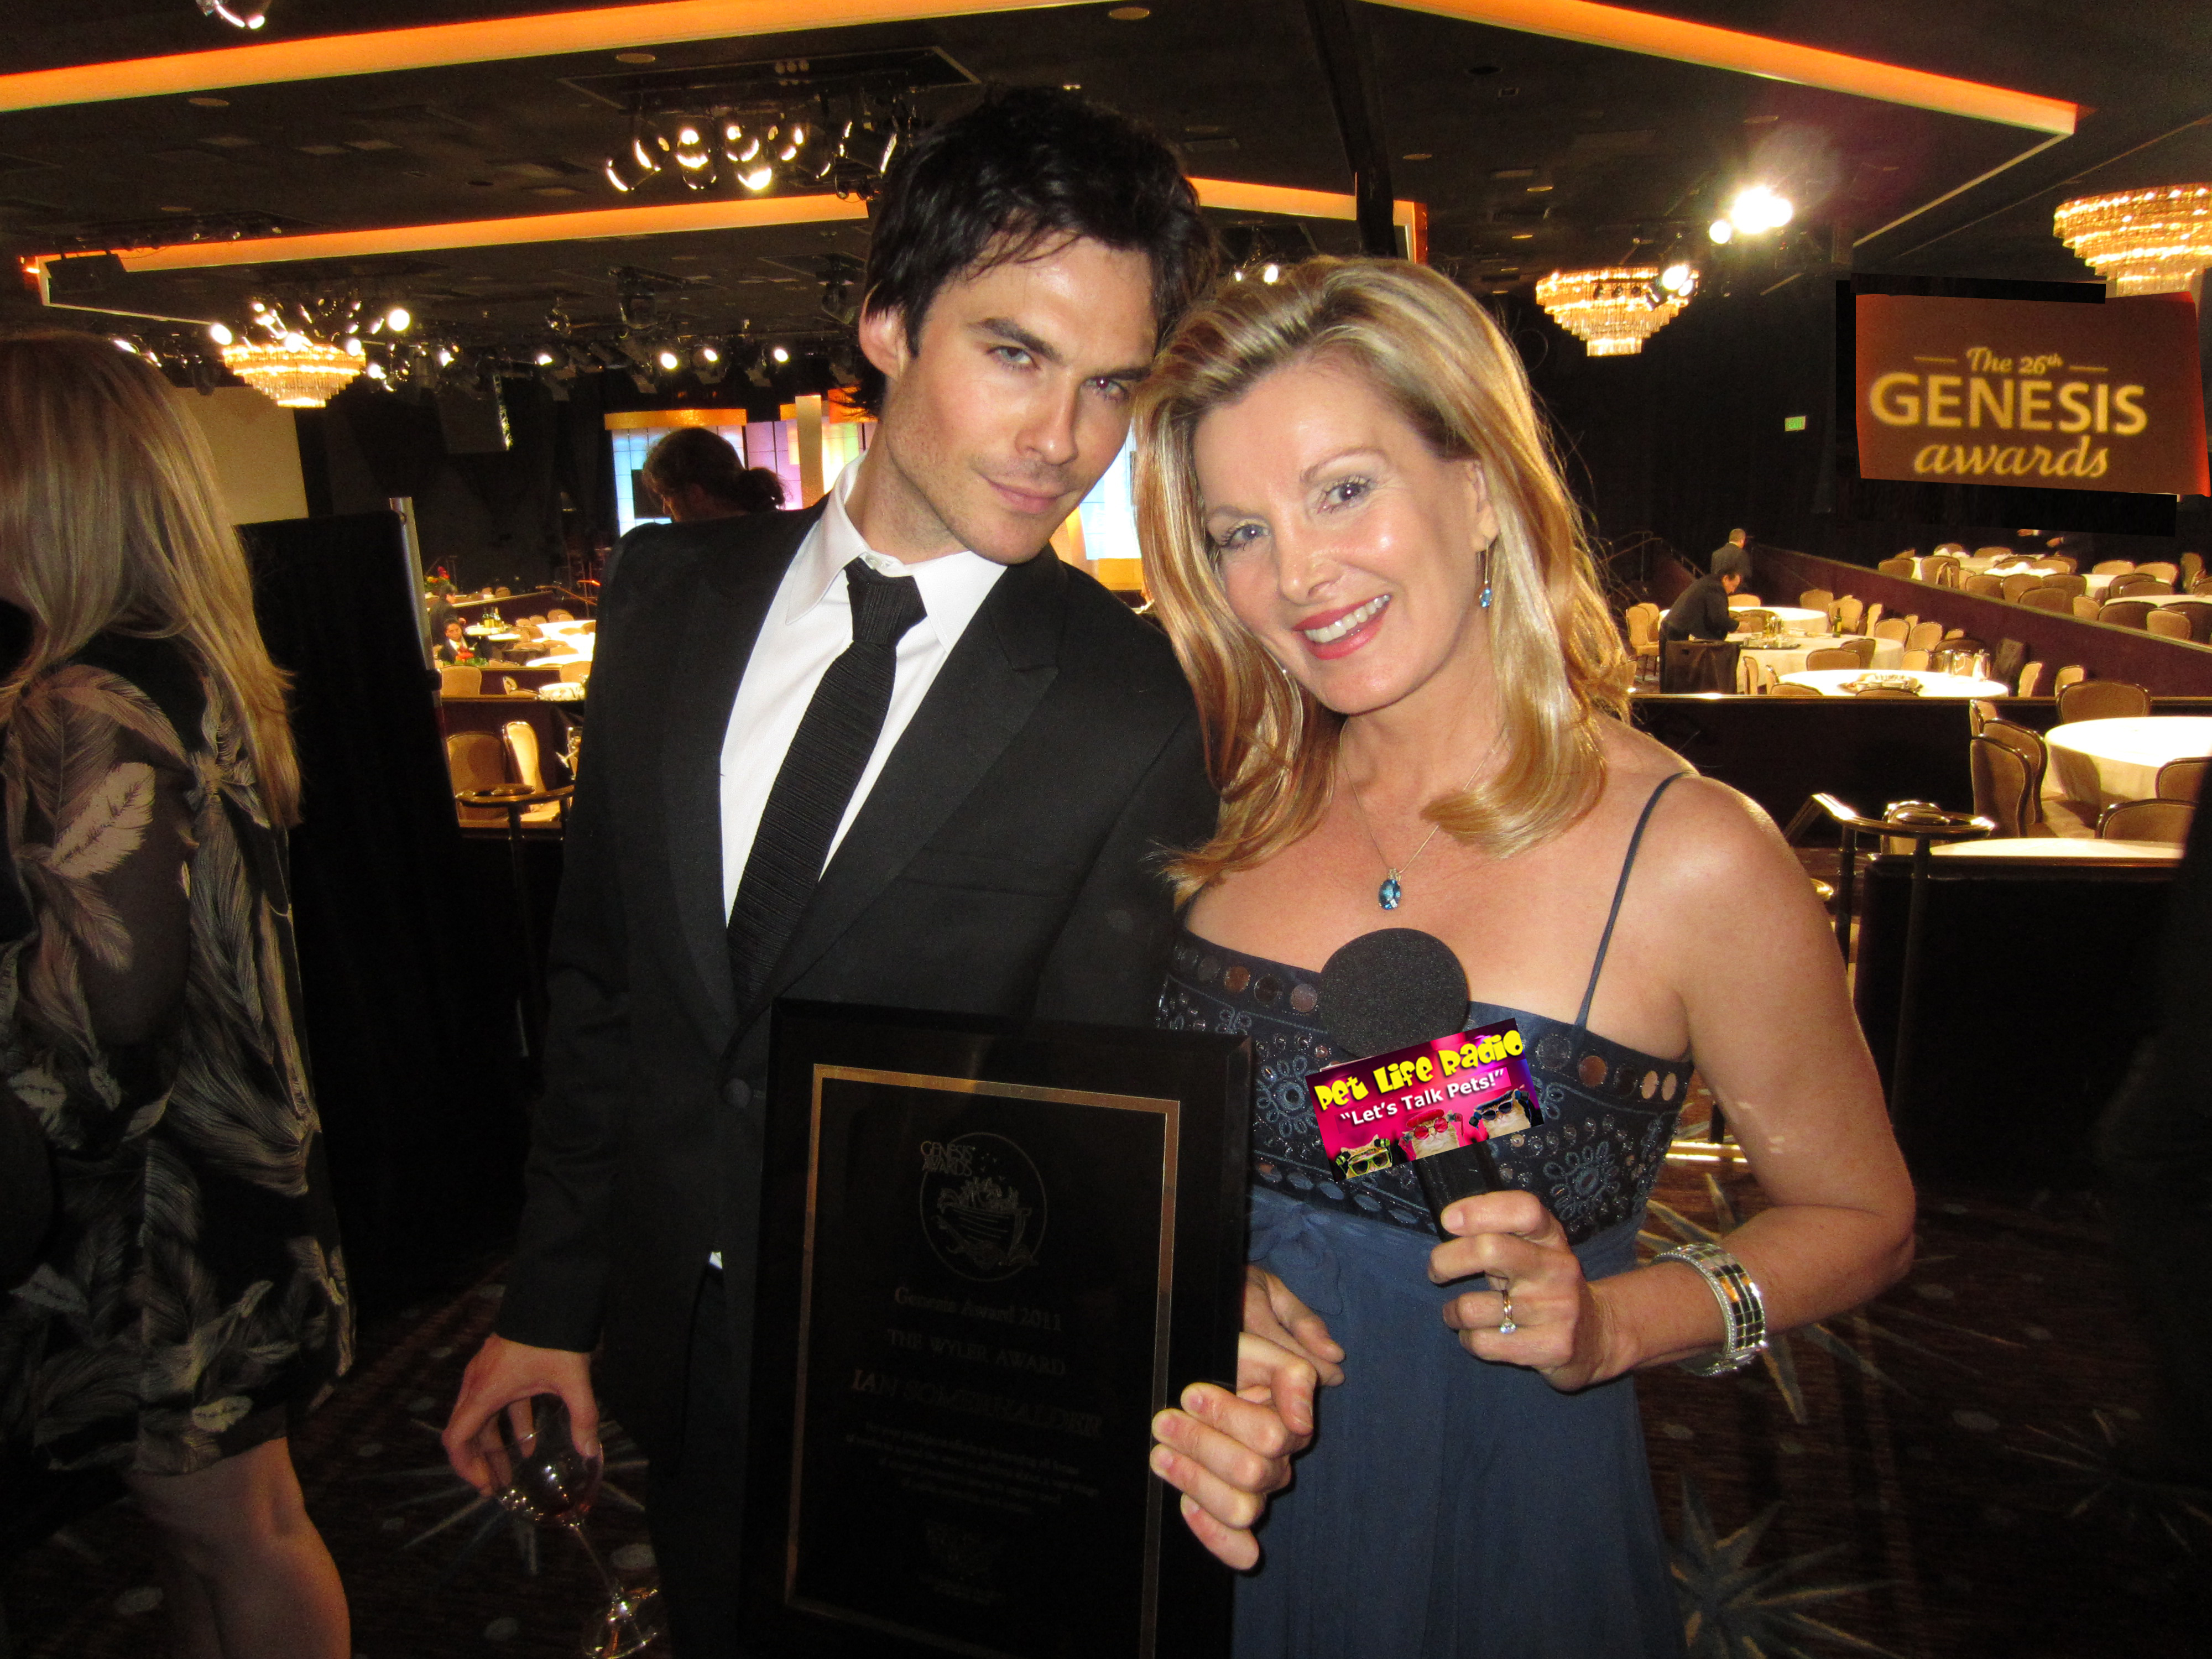 Genesis Awards, Megan Blake wins Honorary Mention for Pet Life Radio, A Super Smiley Adventure. Here with Ian Somerhalder from The Vampire Diaries.